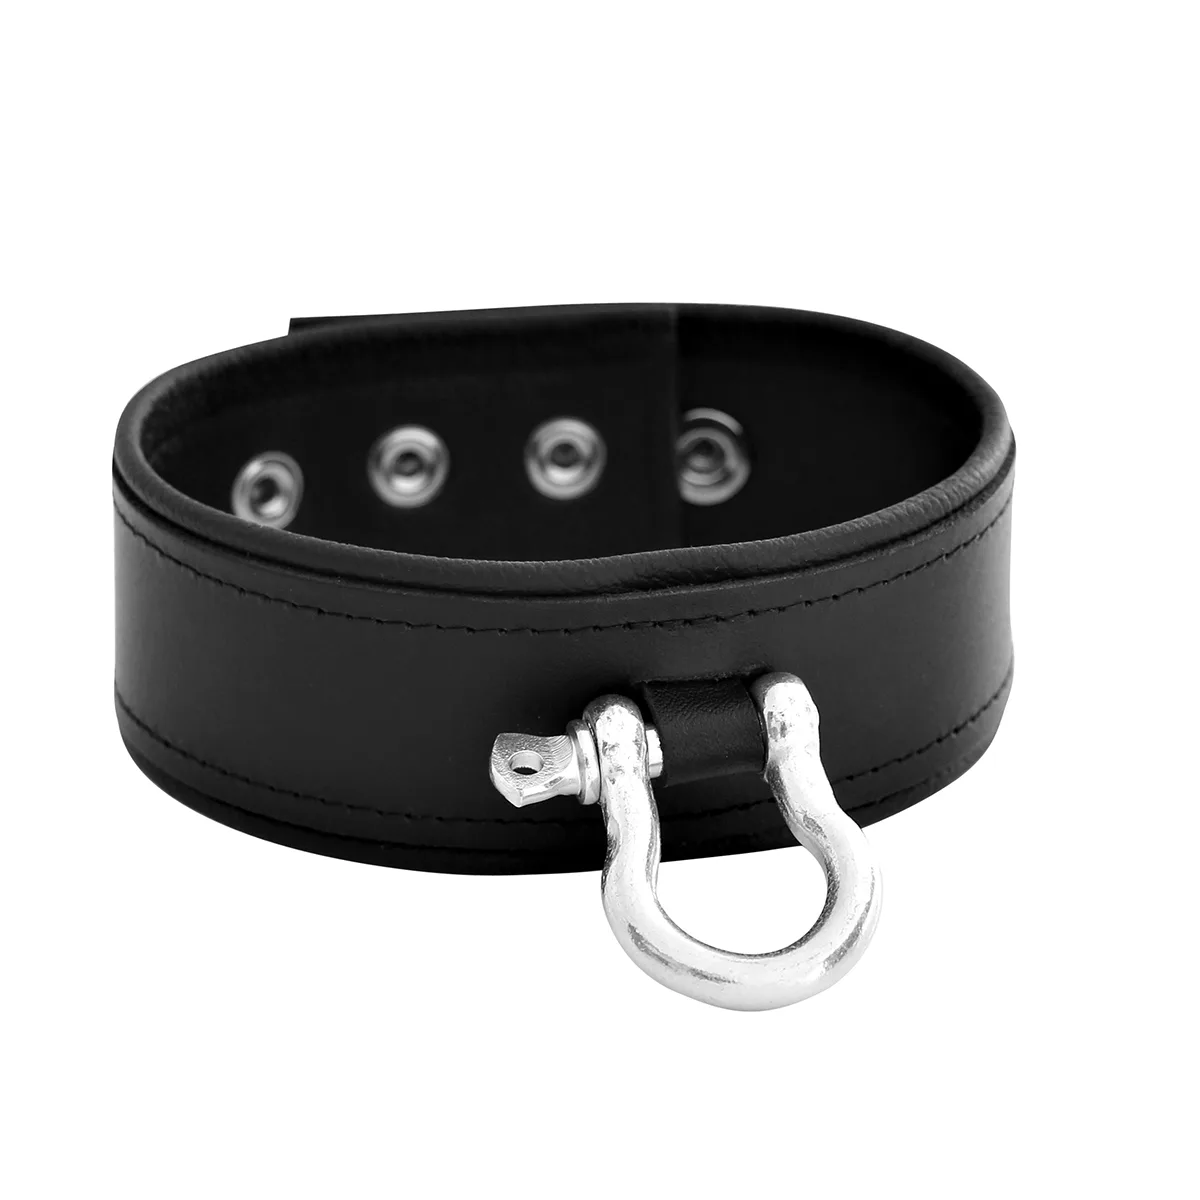 Leather Push Button Collar with Metal Shackle